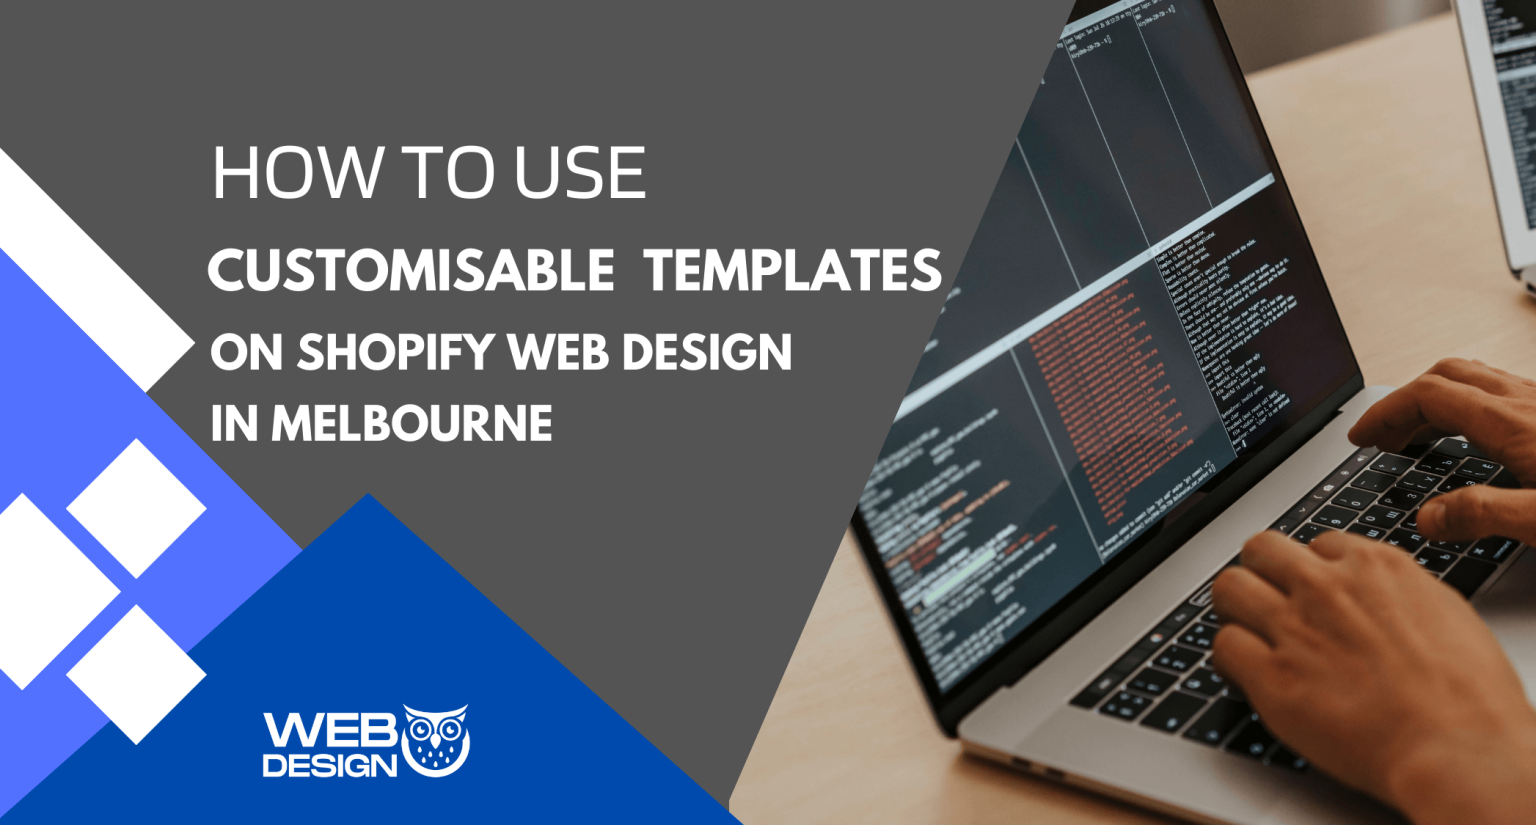 How to use customisable templates on Shopify web design in Melbourne (1)